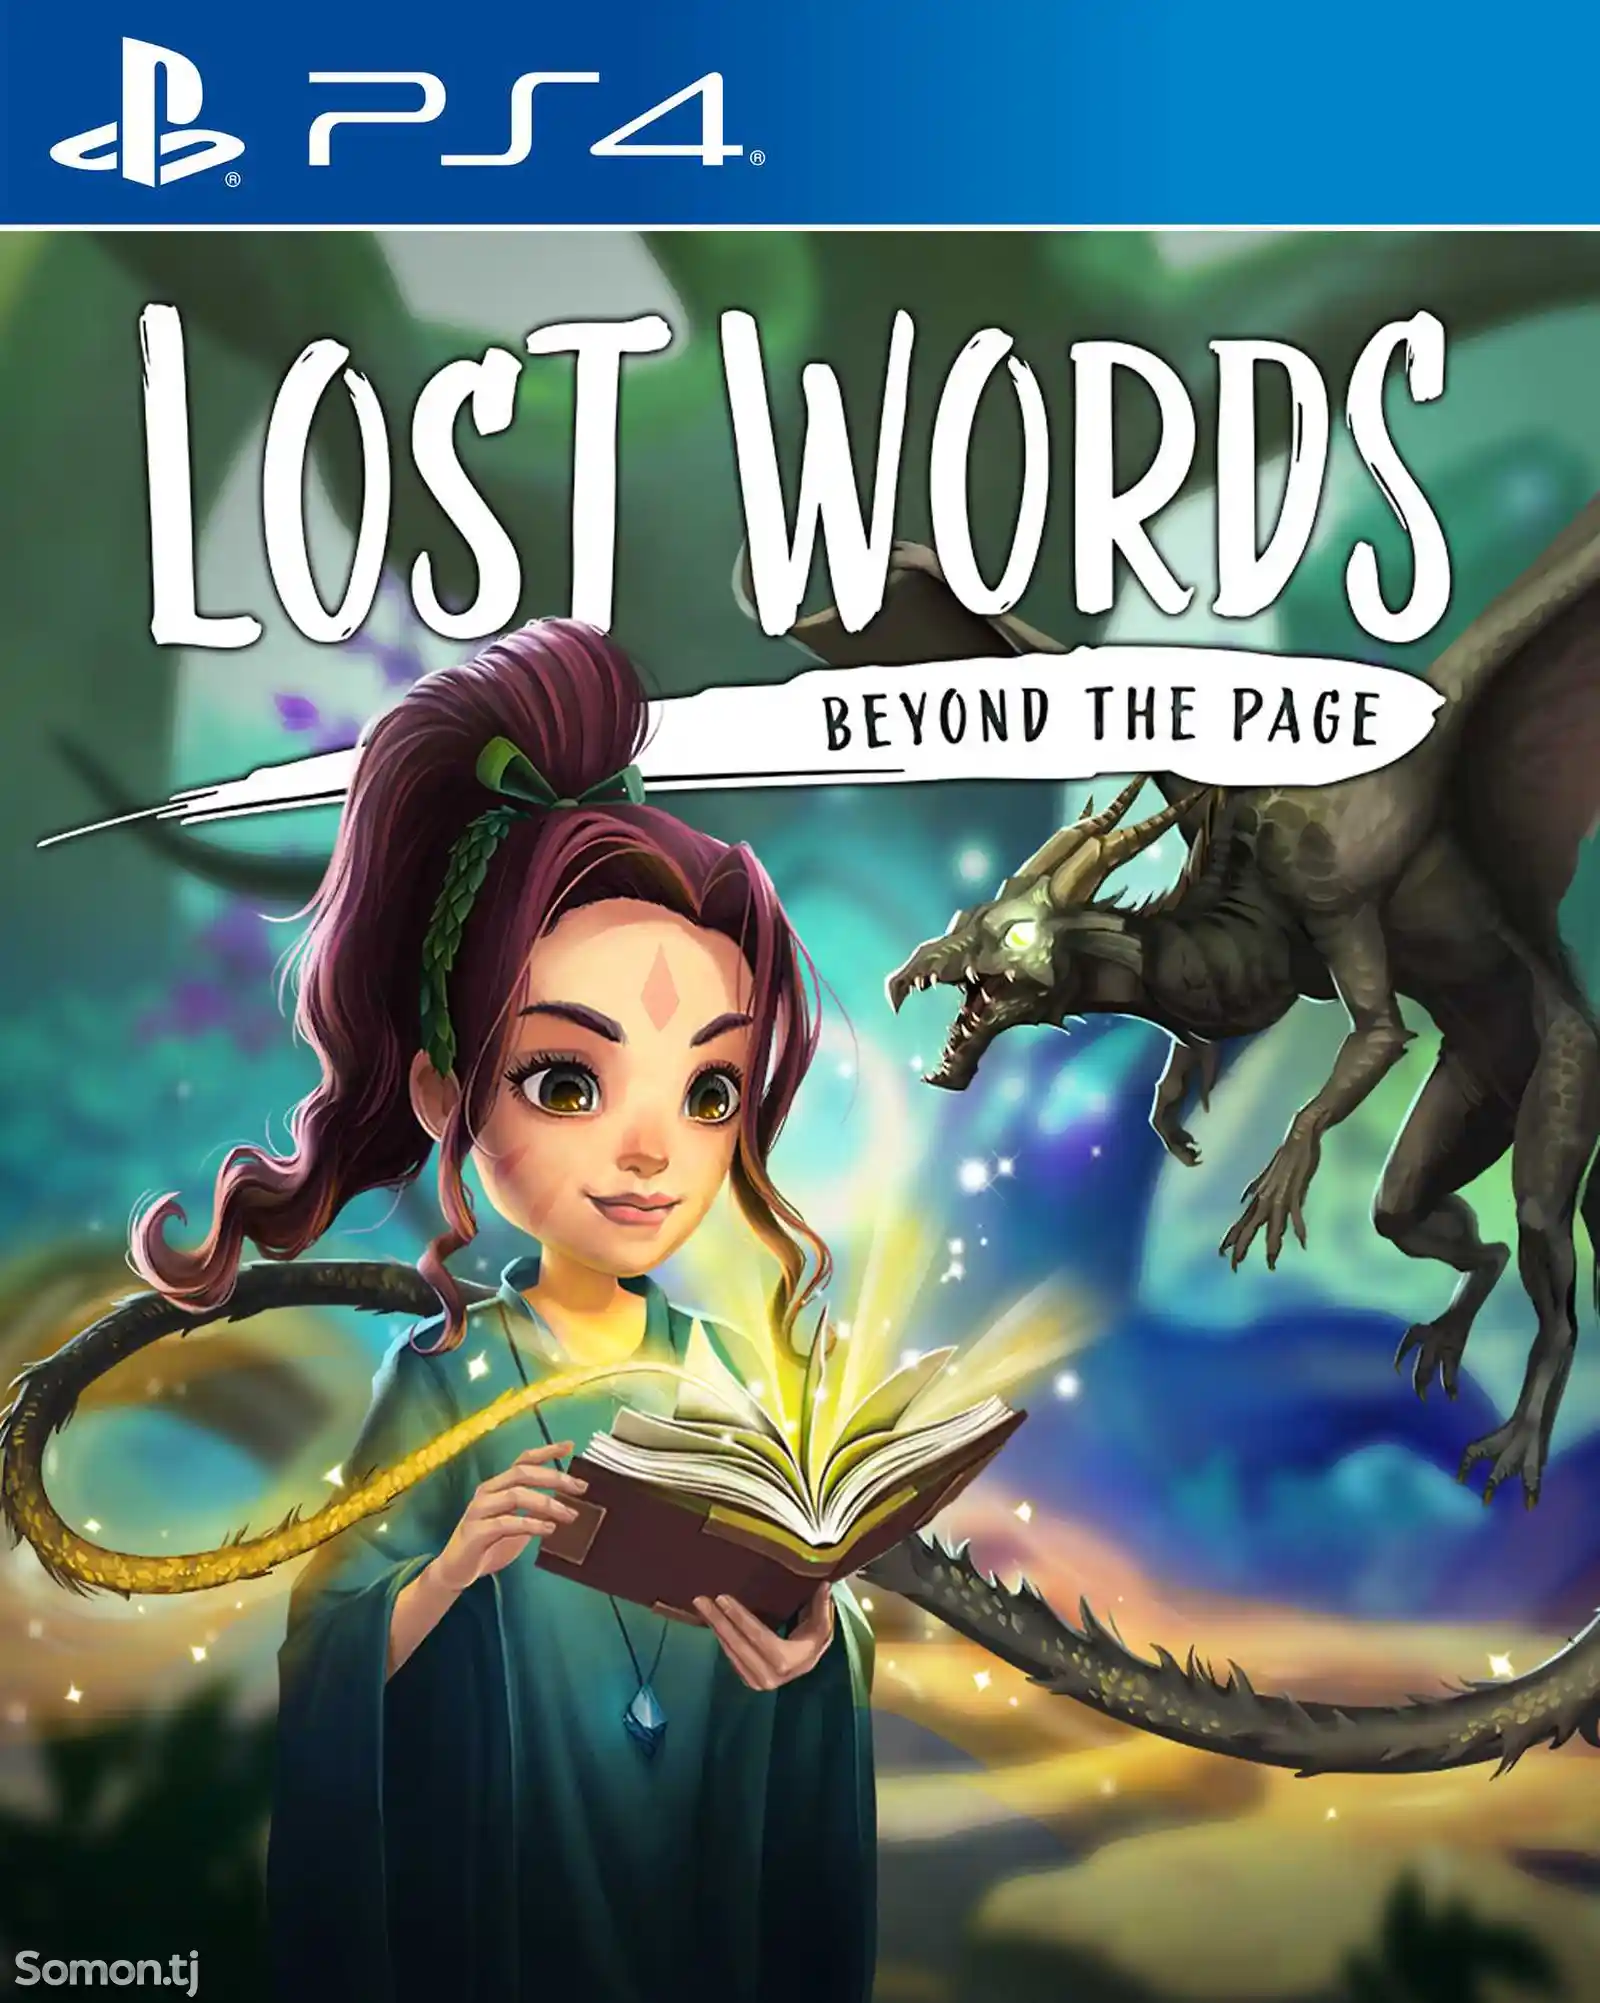 Игра Lost words beyond the page для PS-4 / 5.05 / 6.72 / 7.02 / 7.55 / 9.00-1